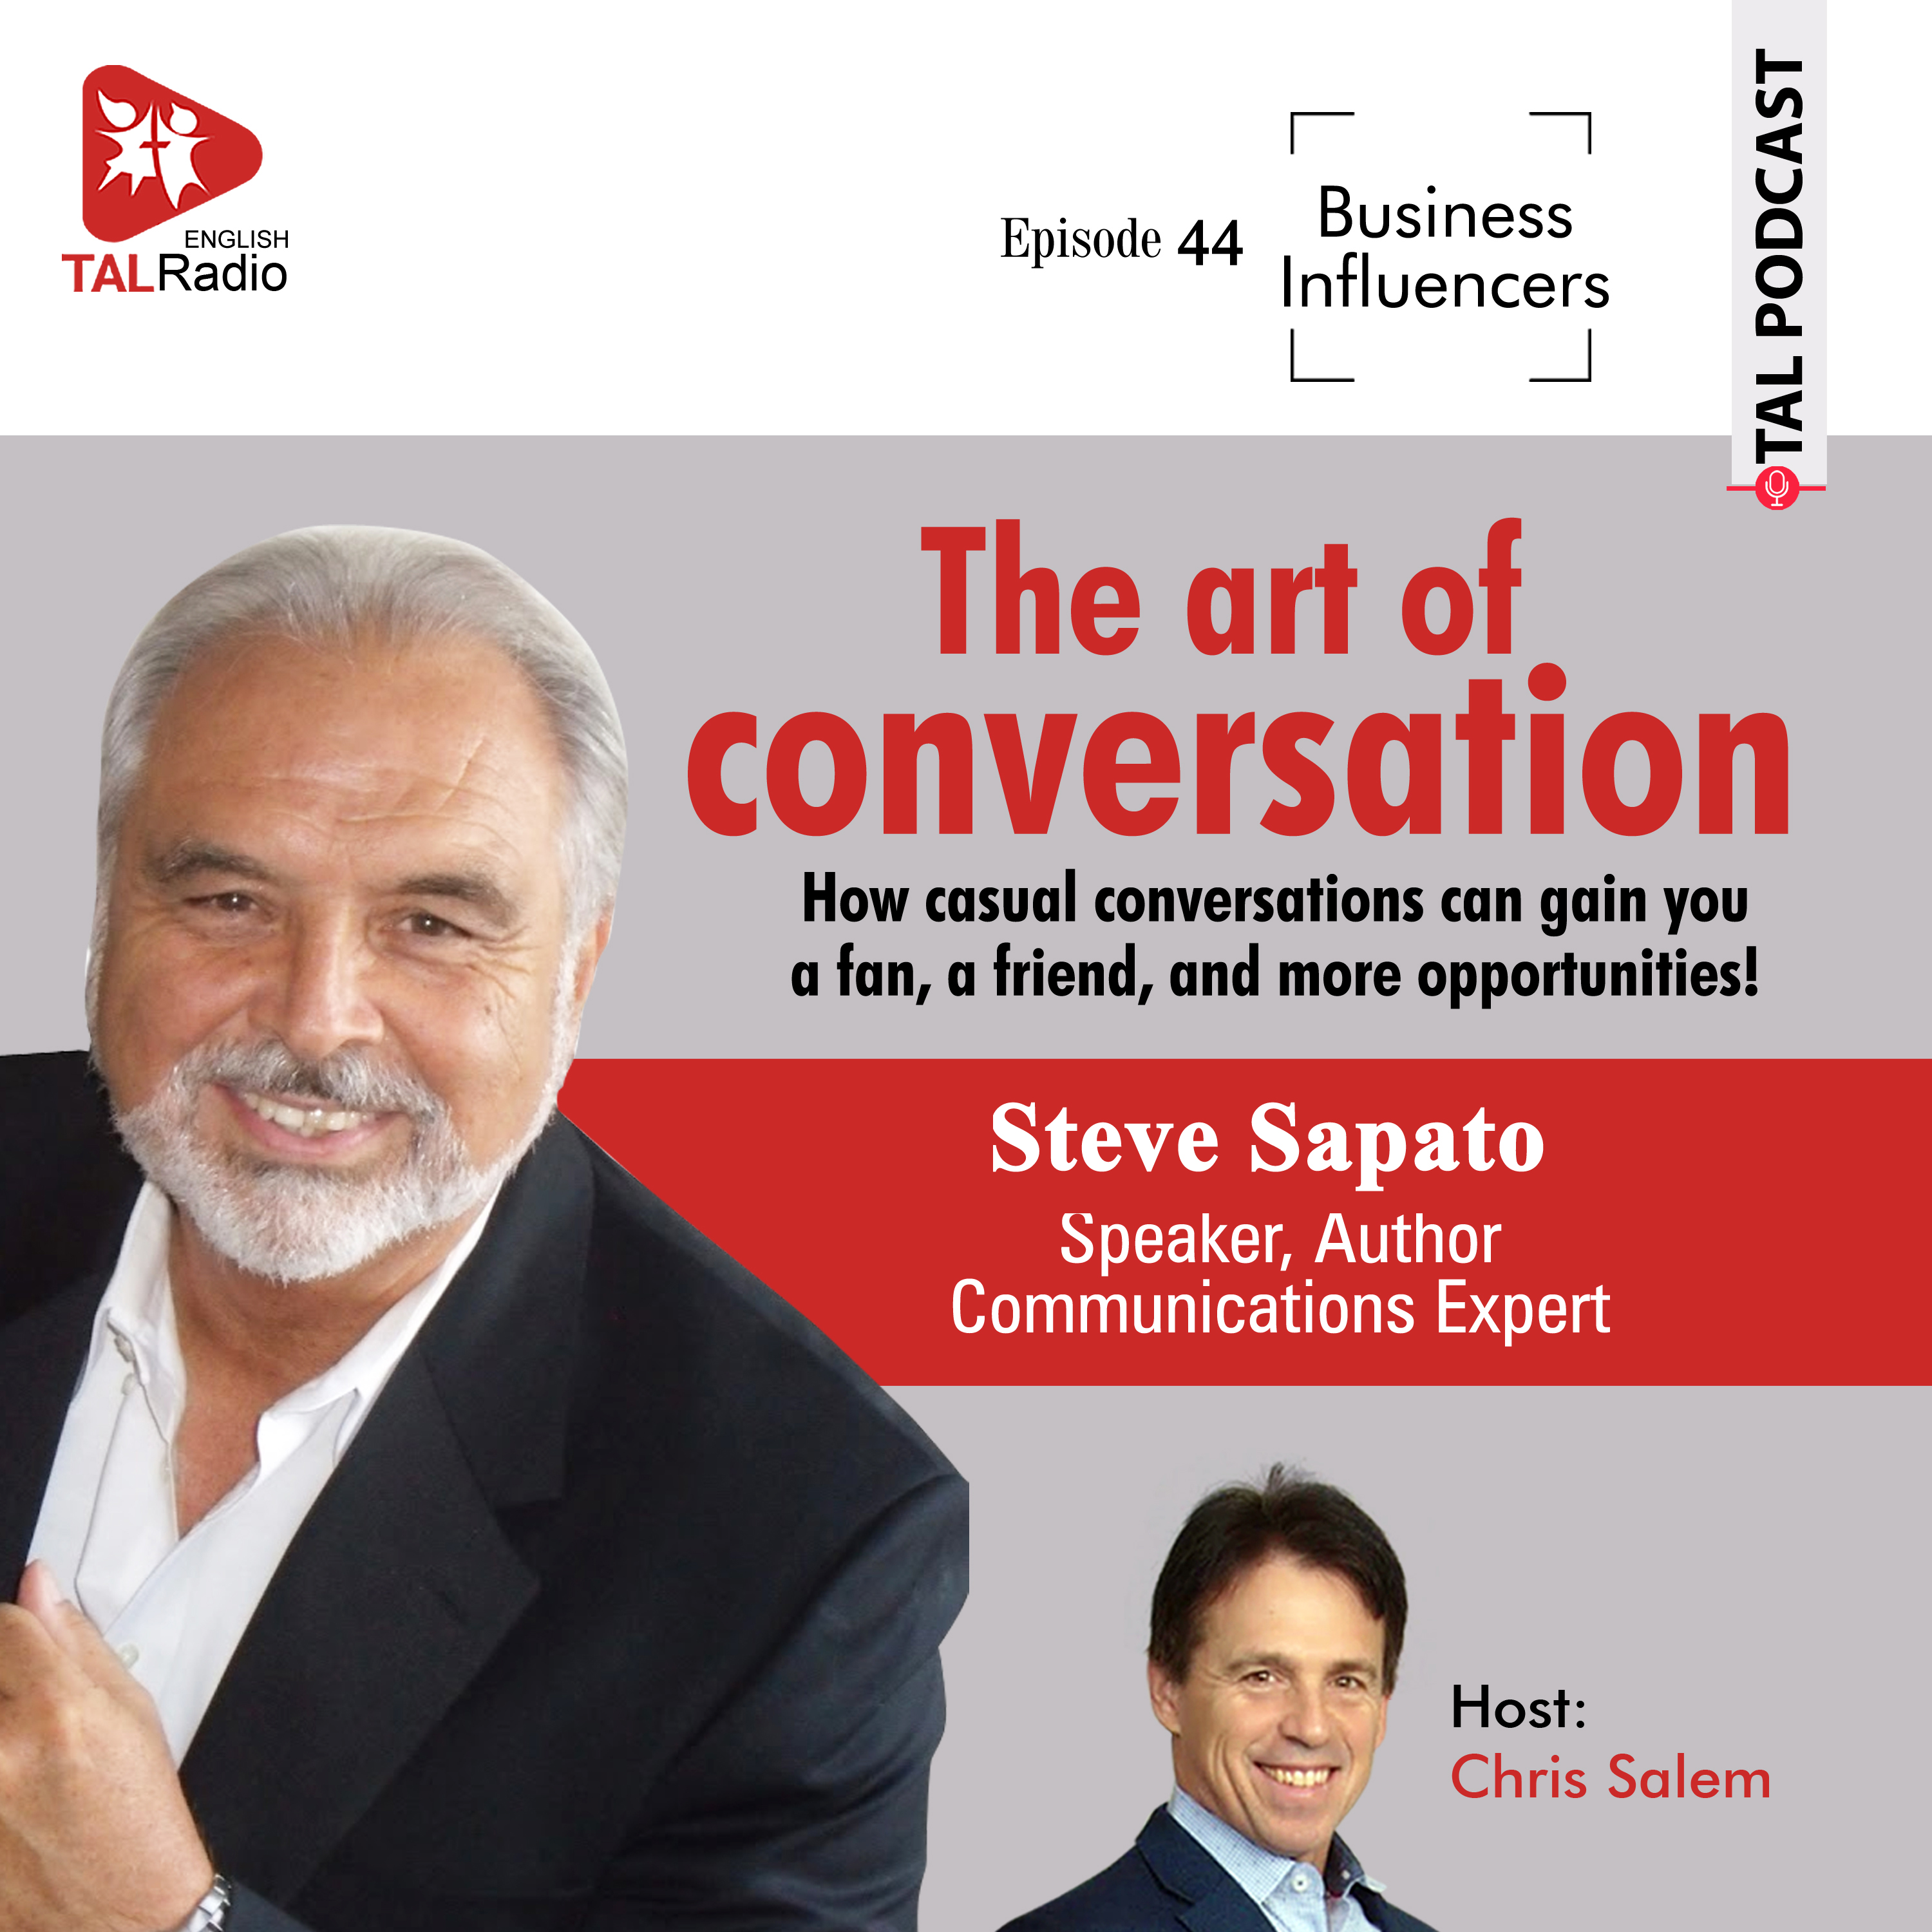 The art of conversation | Business influencers